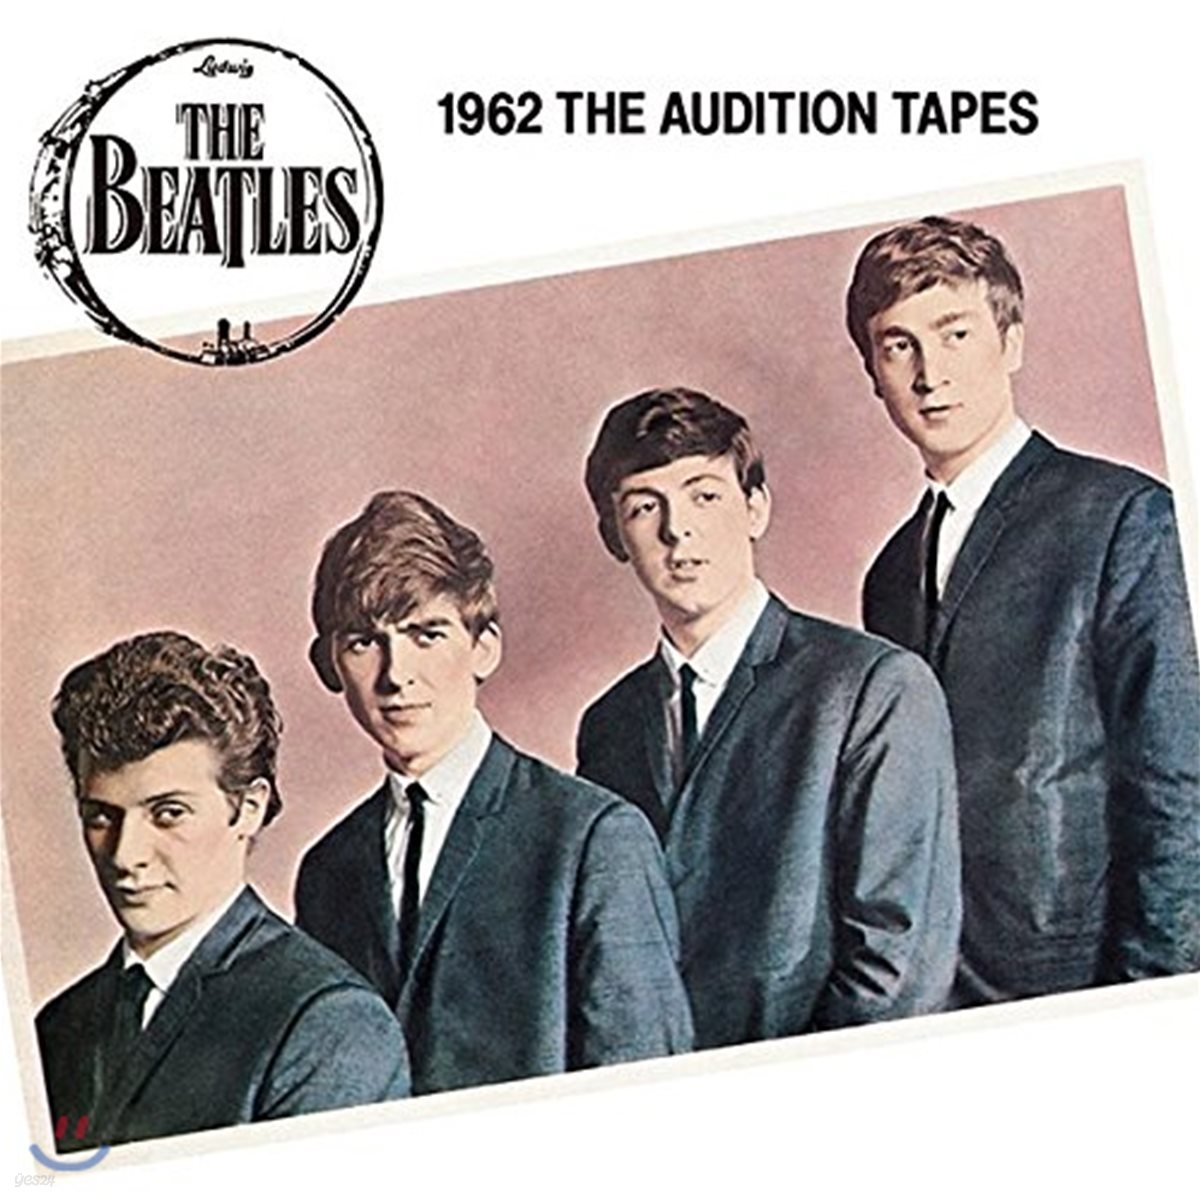 The Beatles (비틀즈) - 1962 The Audition Tapes [LP]